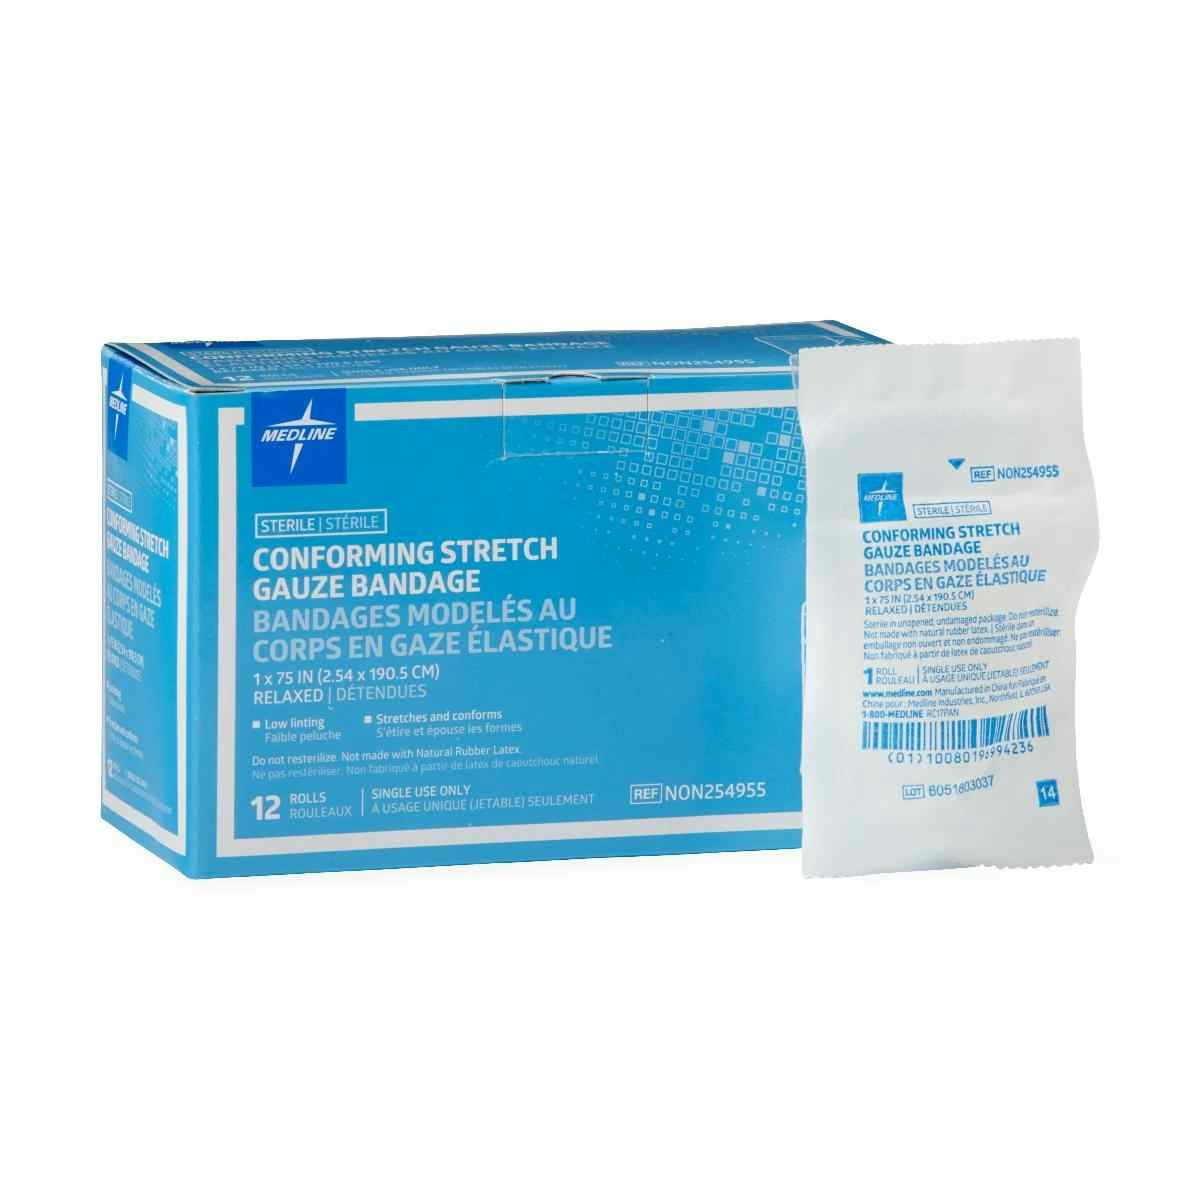 Medline Conforming Stretch Gauze Bandages, Heavy Weight, NON254955, 1" X 75" - Box of 12